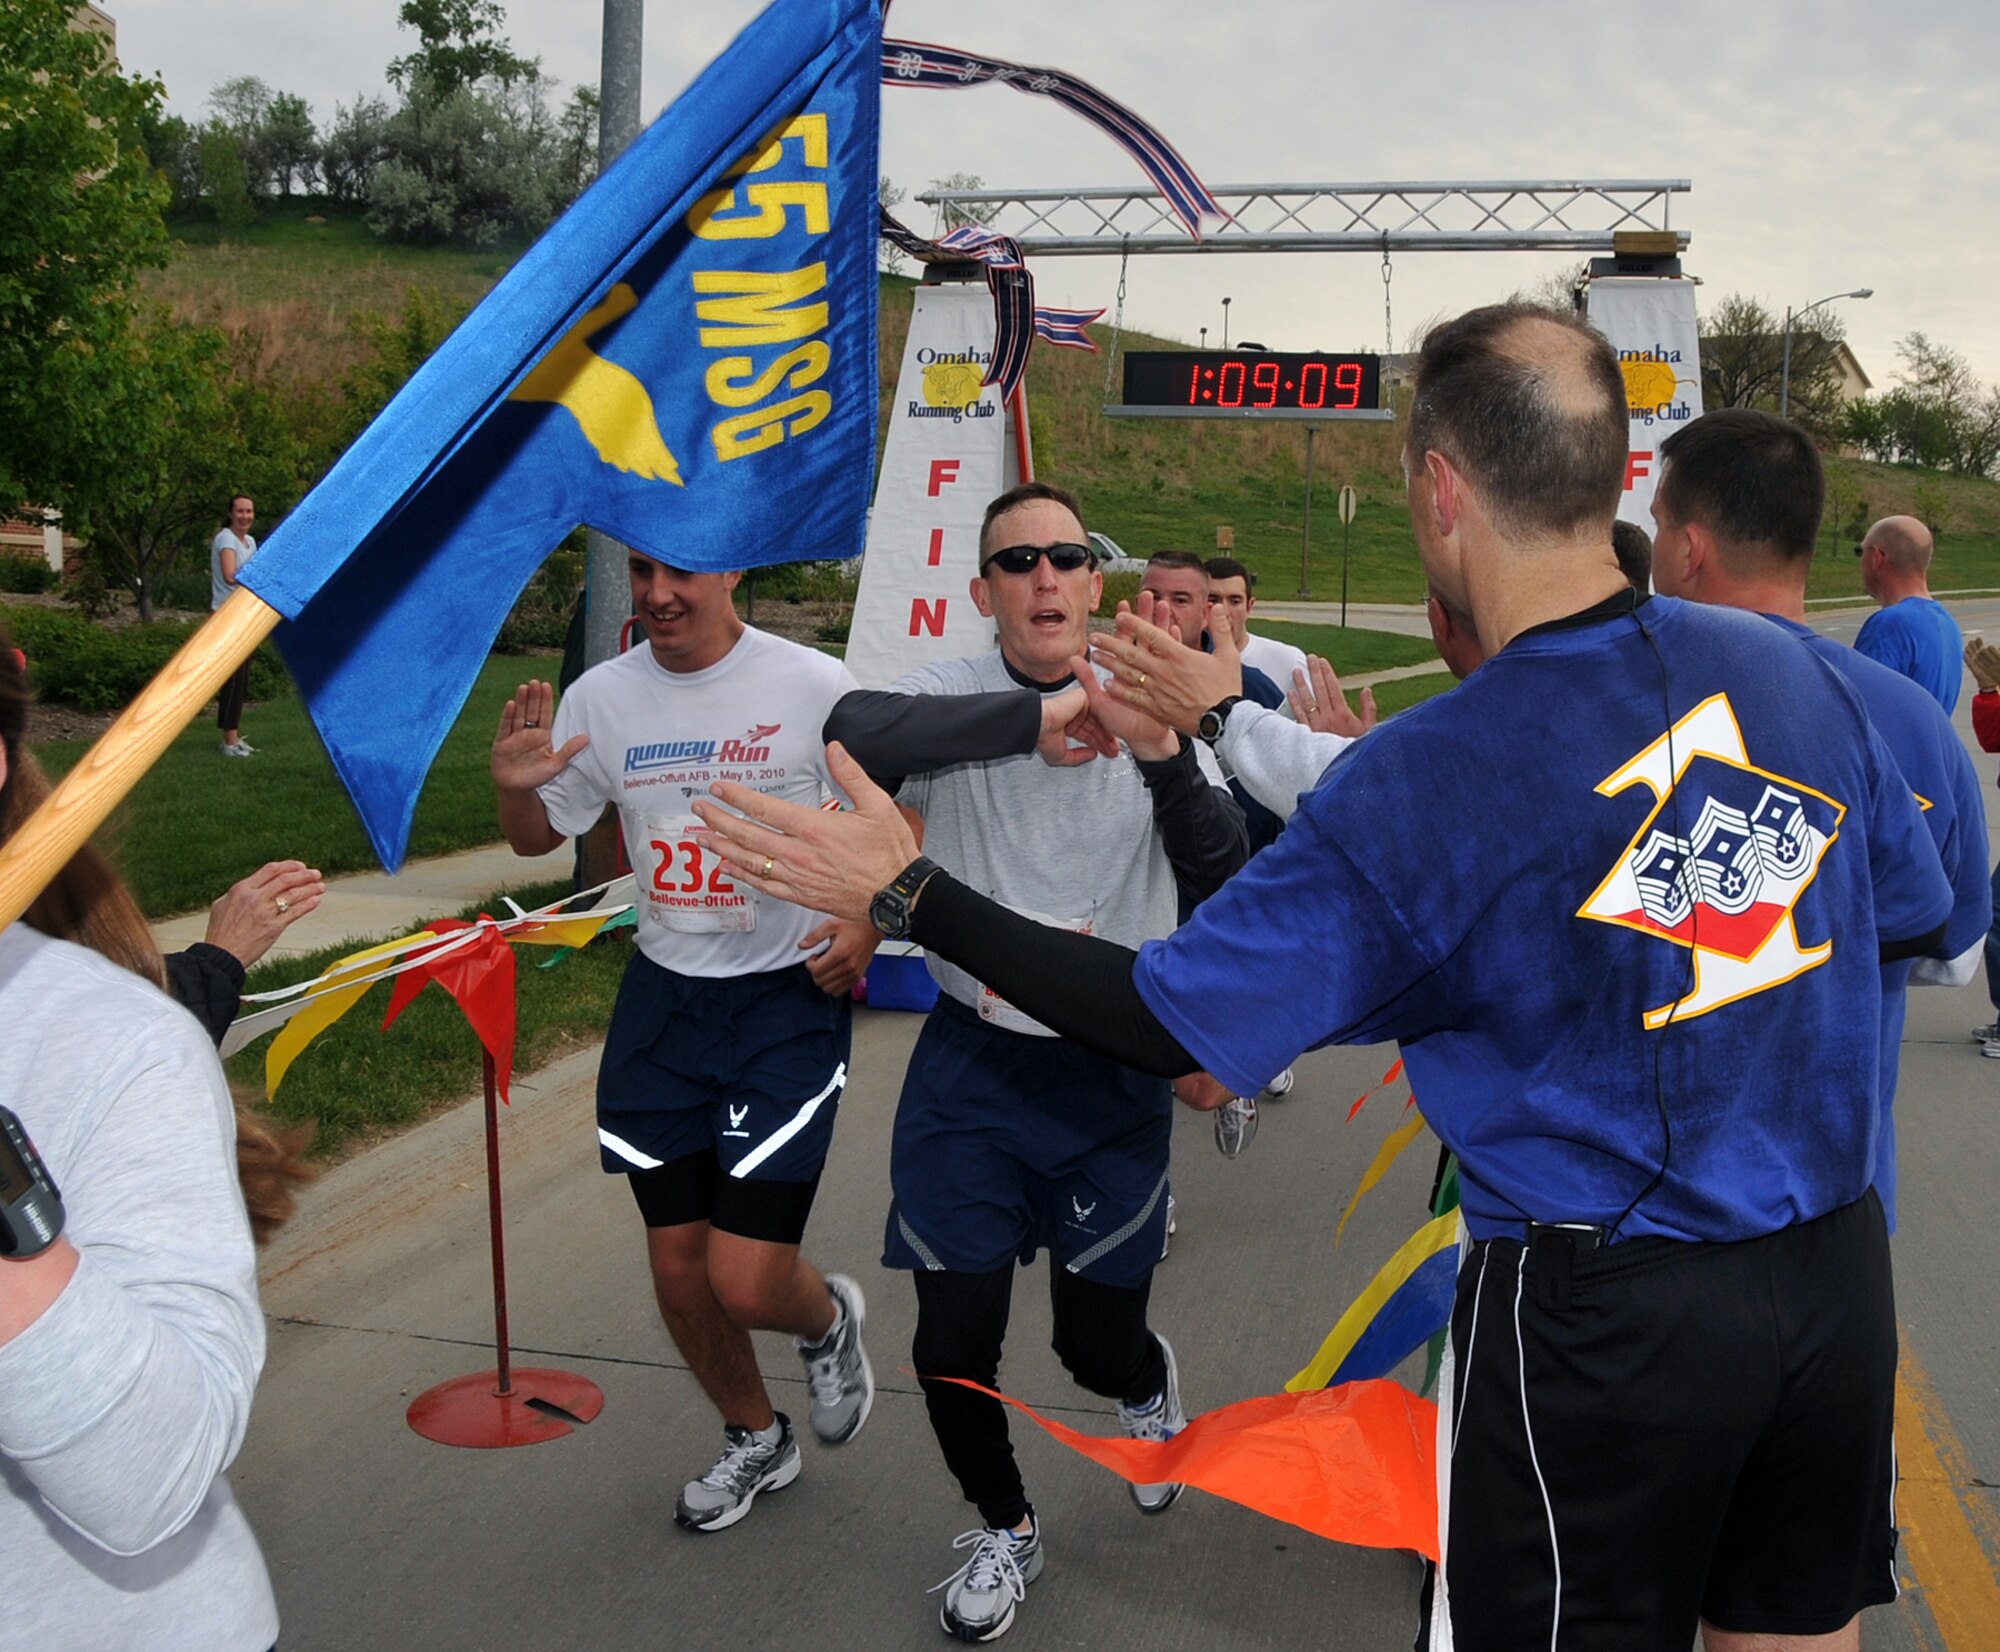 OFFUTT AIR FORCE BASE, Neb. -- Members of the 55th Mission Support Group are greeted by several high fives as they finish the third annual Bellevue-Offutt Runway Run May 9. More than 140 runners participated in the seven mile race which included about two miles on Offutt's runway. U.S. Air Force Photo by Jeff W. Gates